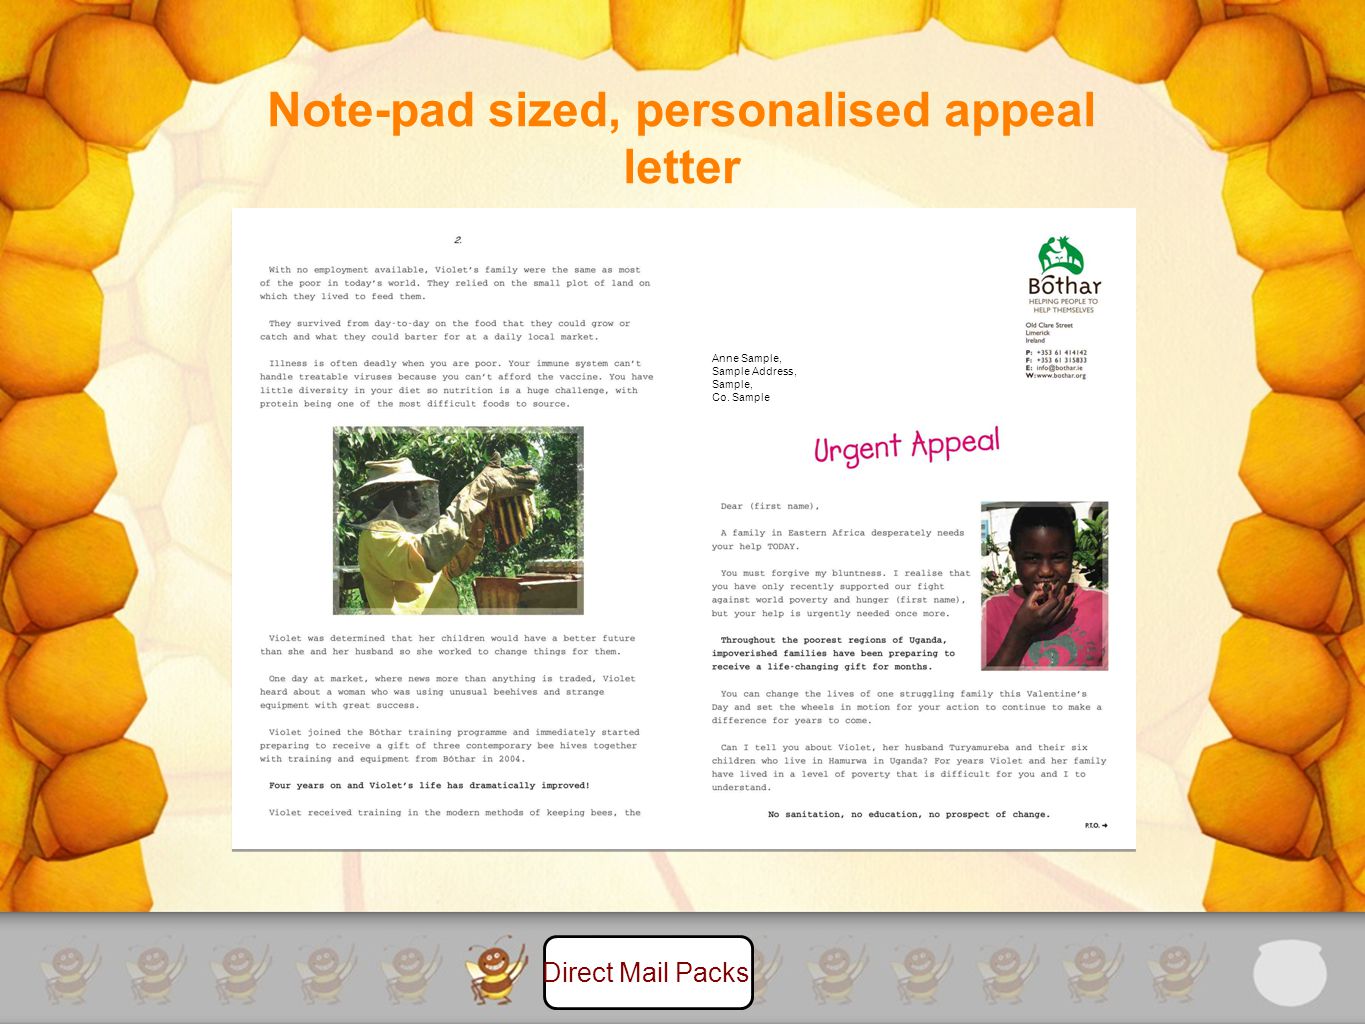 Note-pad sized, personalised appeal letter Direct Mail Packs Anne Sample, Sample Address, Sample, Co.